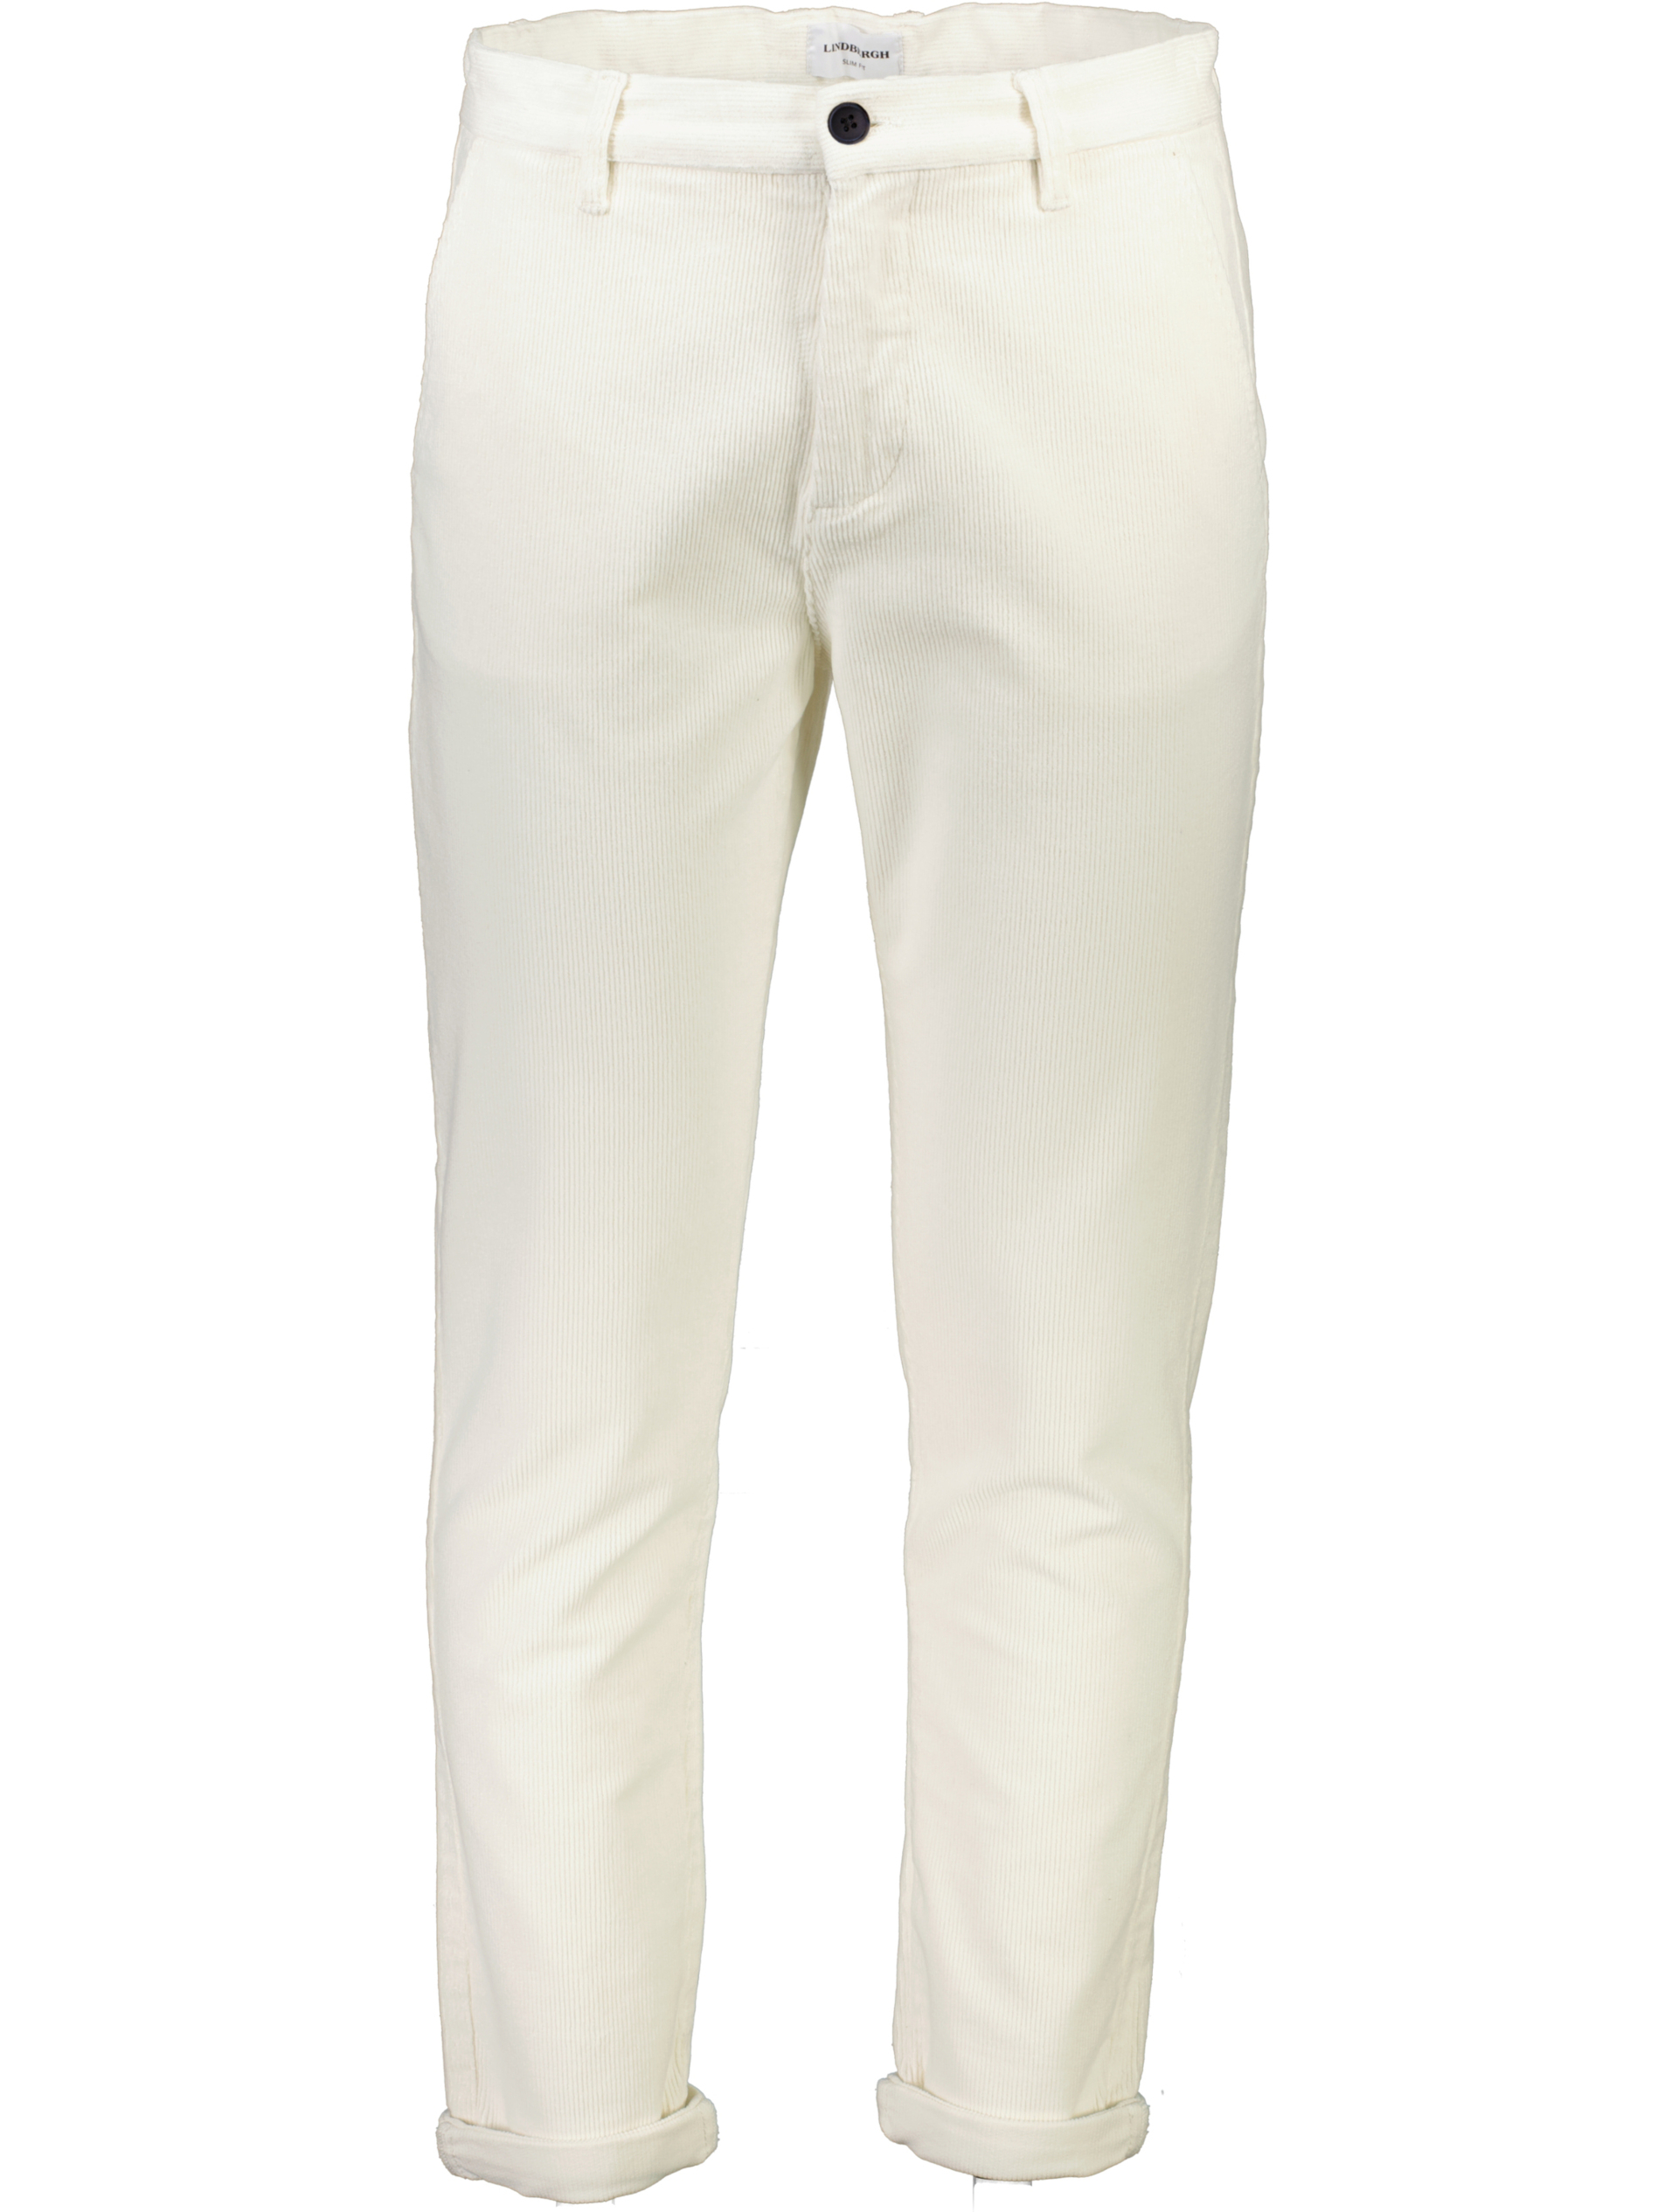 Lindbergh Cordhose weiss / off white